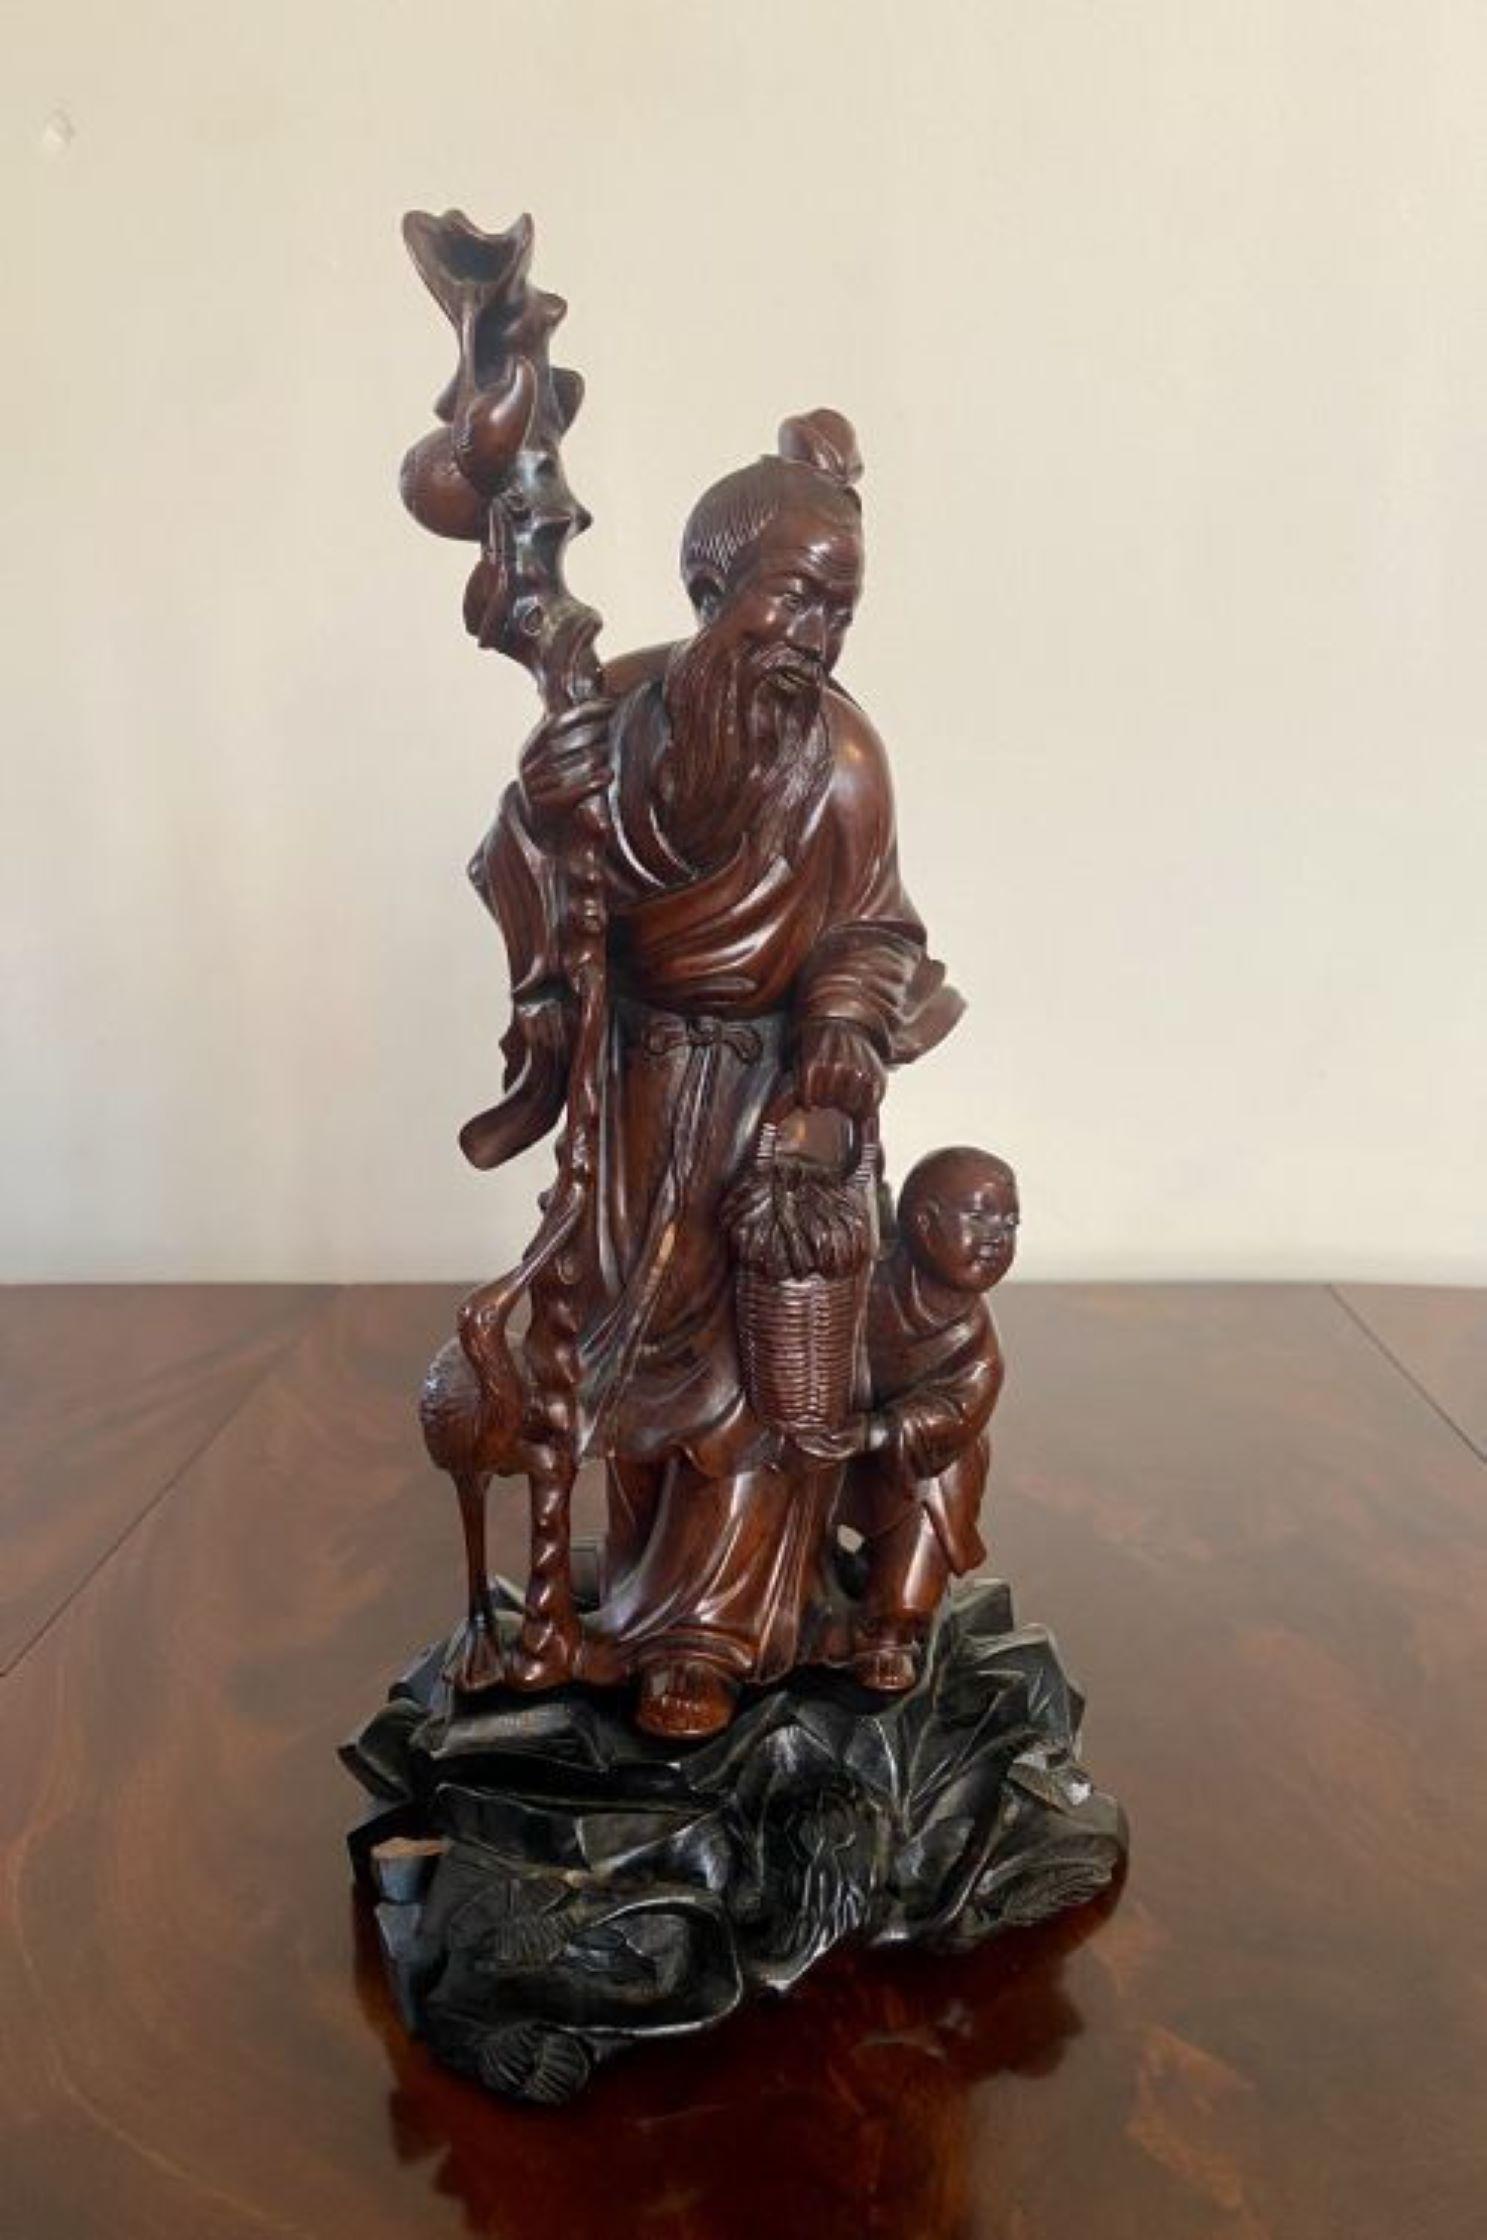 Quality antique Chinese carved hardwood figure of a shoulou with a staff, attendant child and a stork standing on a carved base 